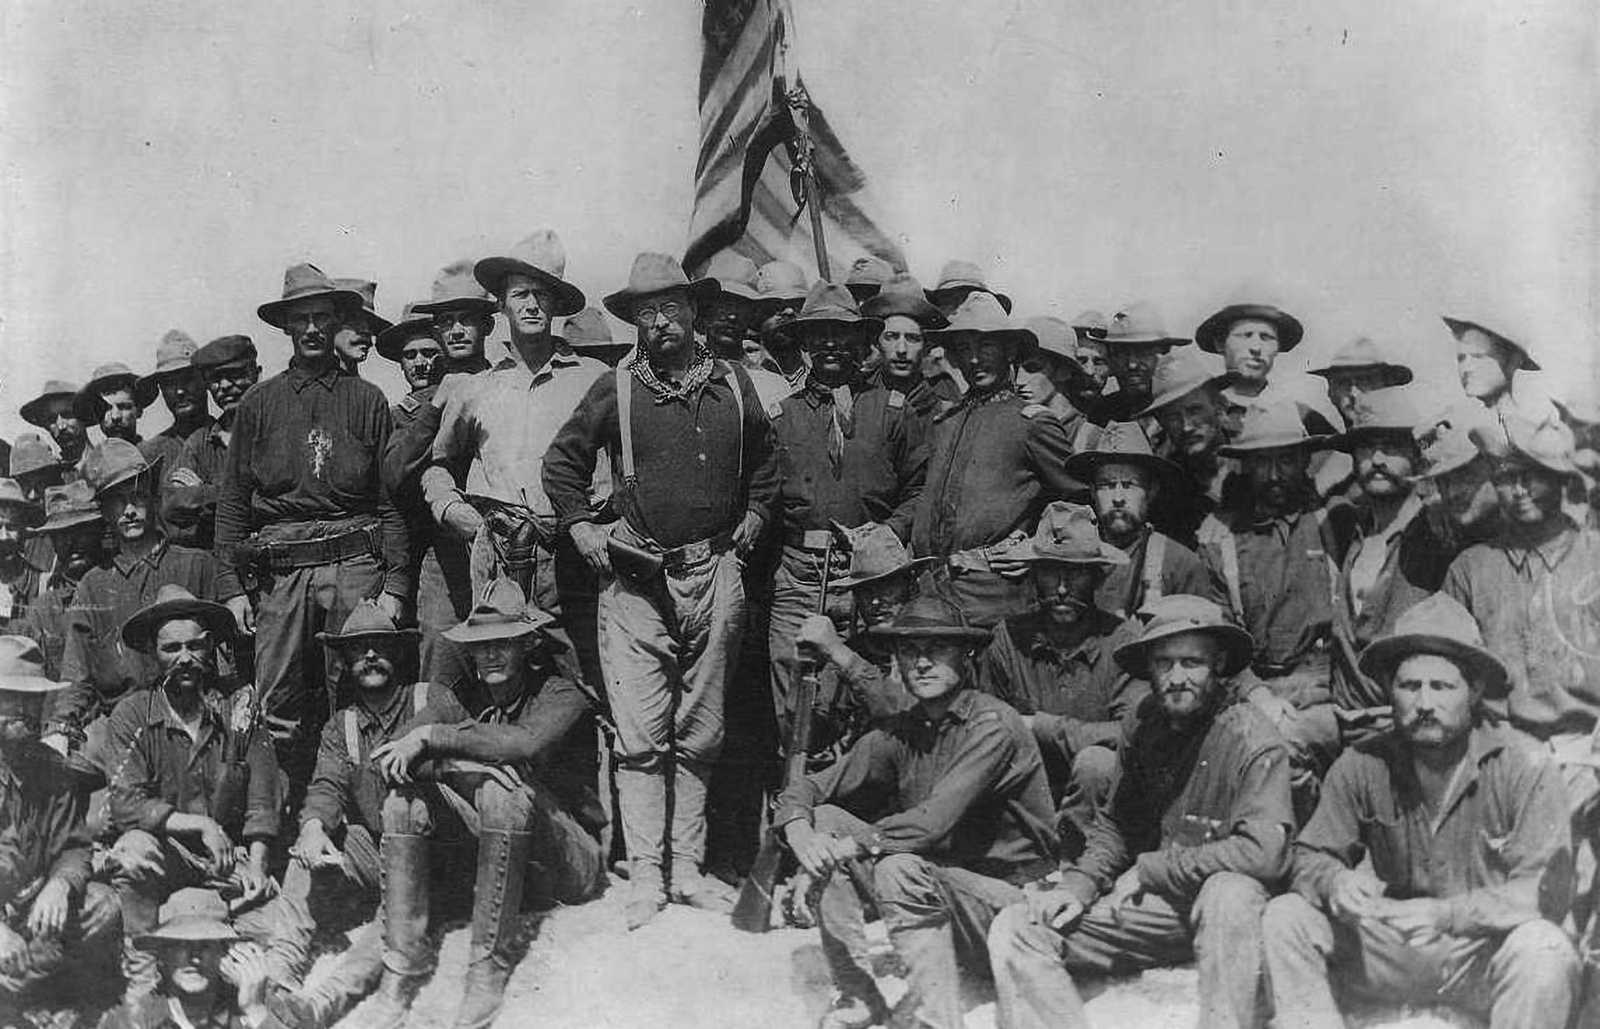 Black and white photo of Theodore Roosevelt surrounded by troops sitting on a hill, with the American flag hoisted behind them